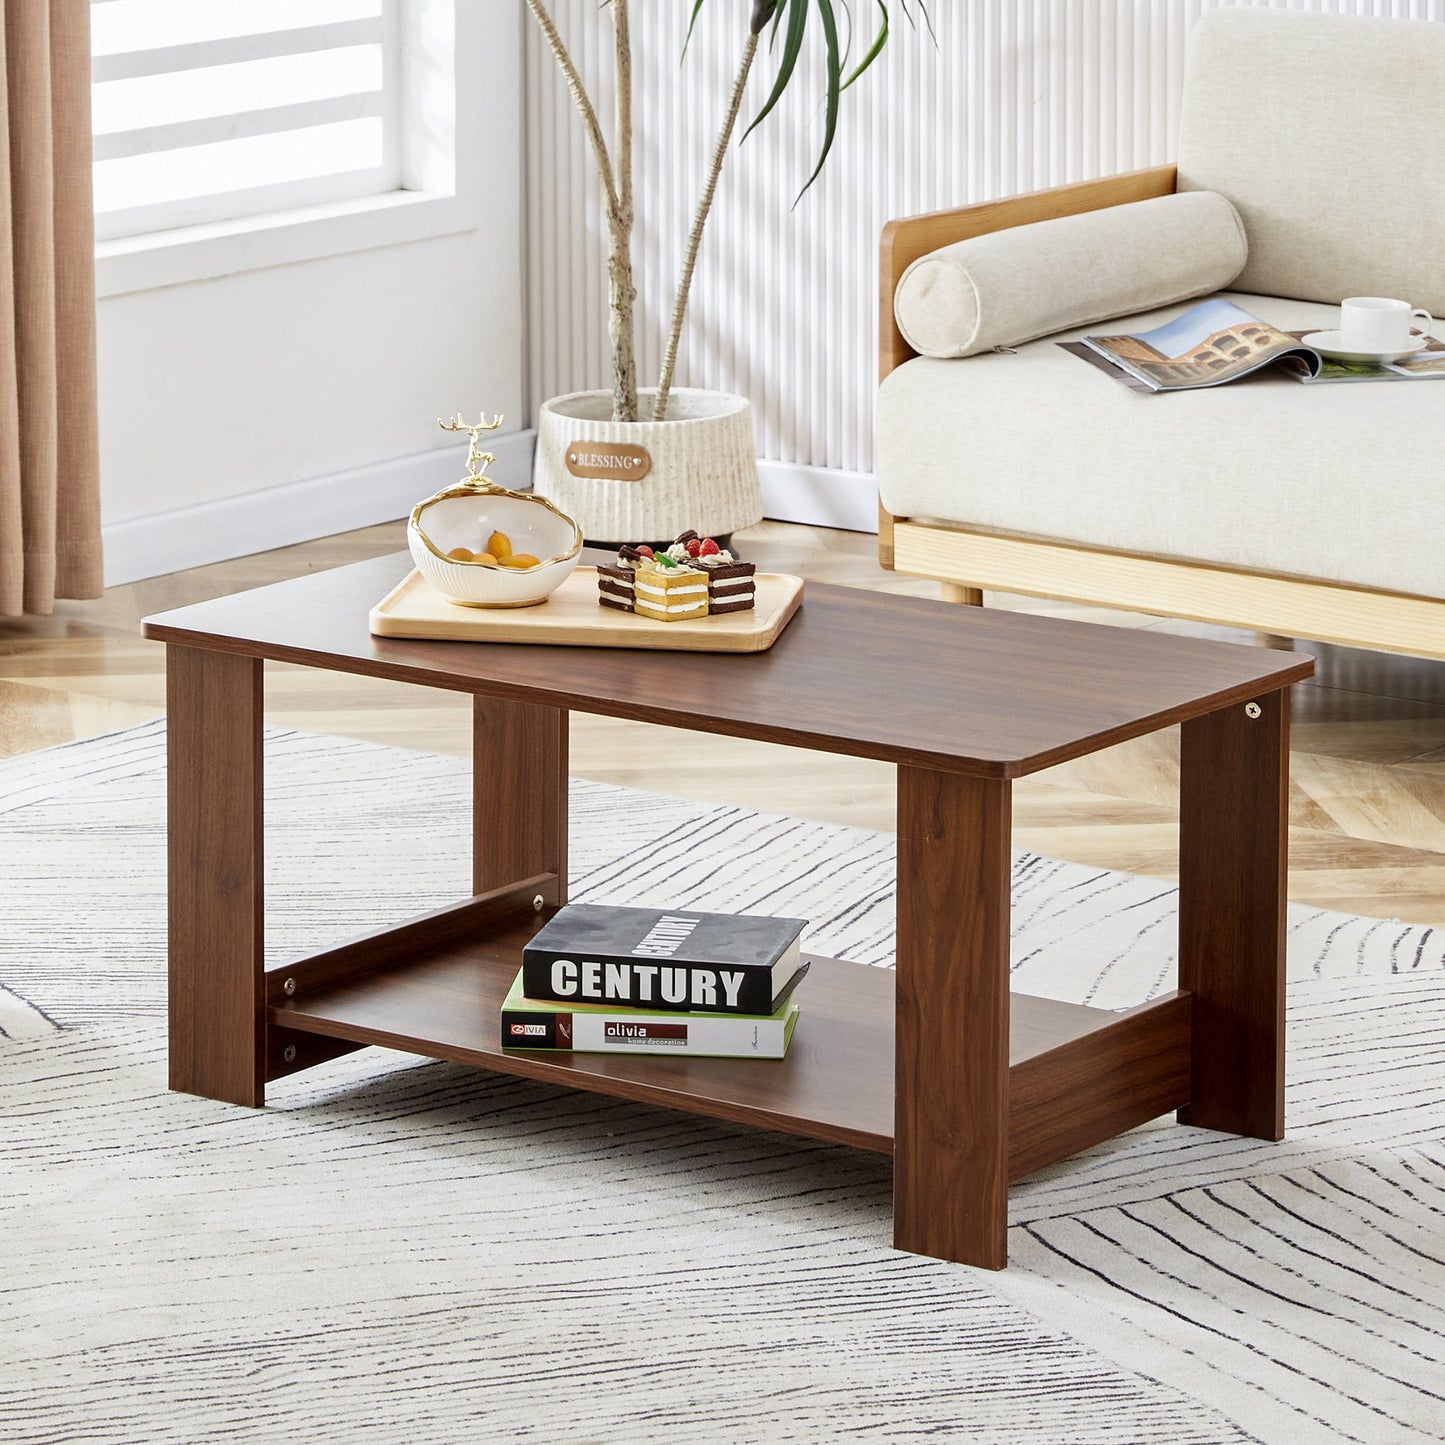 Modern minimalist walnut colored double layered rectangular coffee table ,tea table.MDF material is more durable,Suitable for living room, bedroom, and study room.19.6"*35.4"*16.5"  CT-16